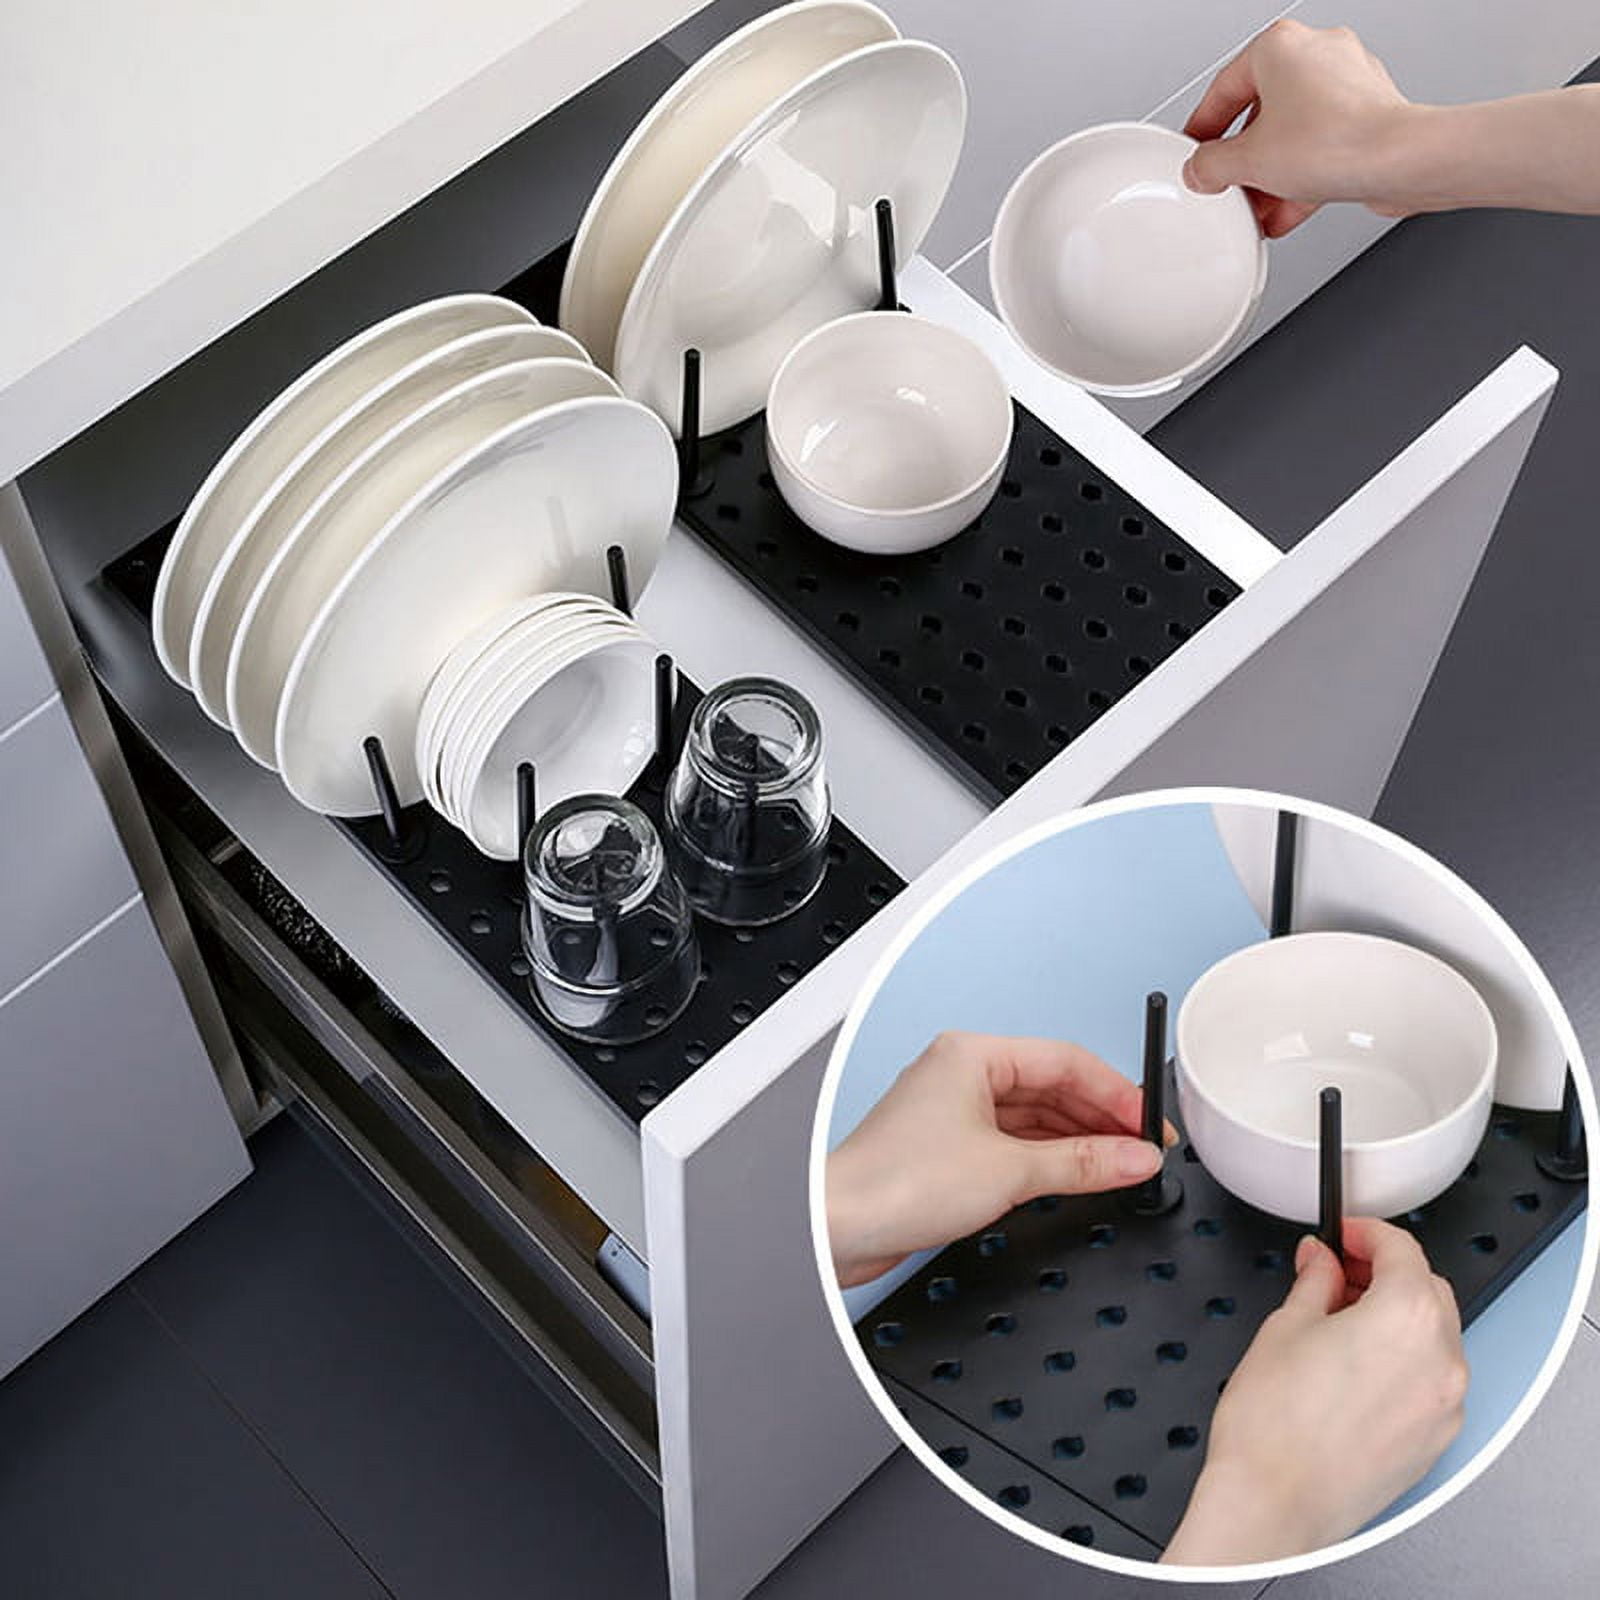 2PCS Dinnerware Bowl Plate Holder ,Bowl Holders Organizer Fit for 6.5  Inches Diameters Bowl, Metal Bowl Storage Dying Display Rack for Kitchen  Drawer